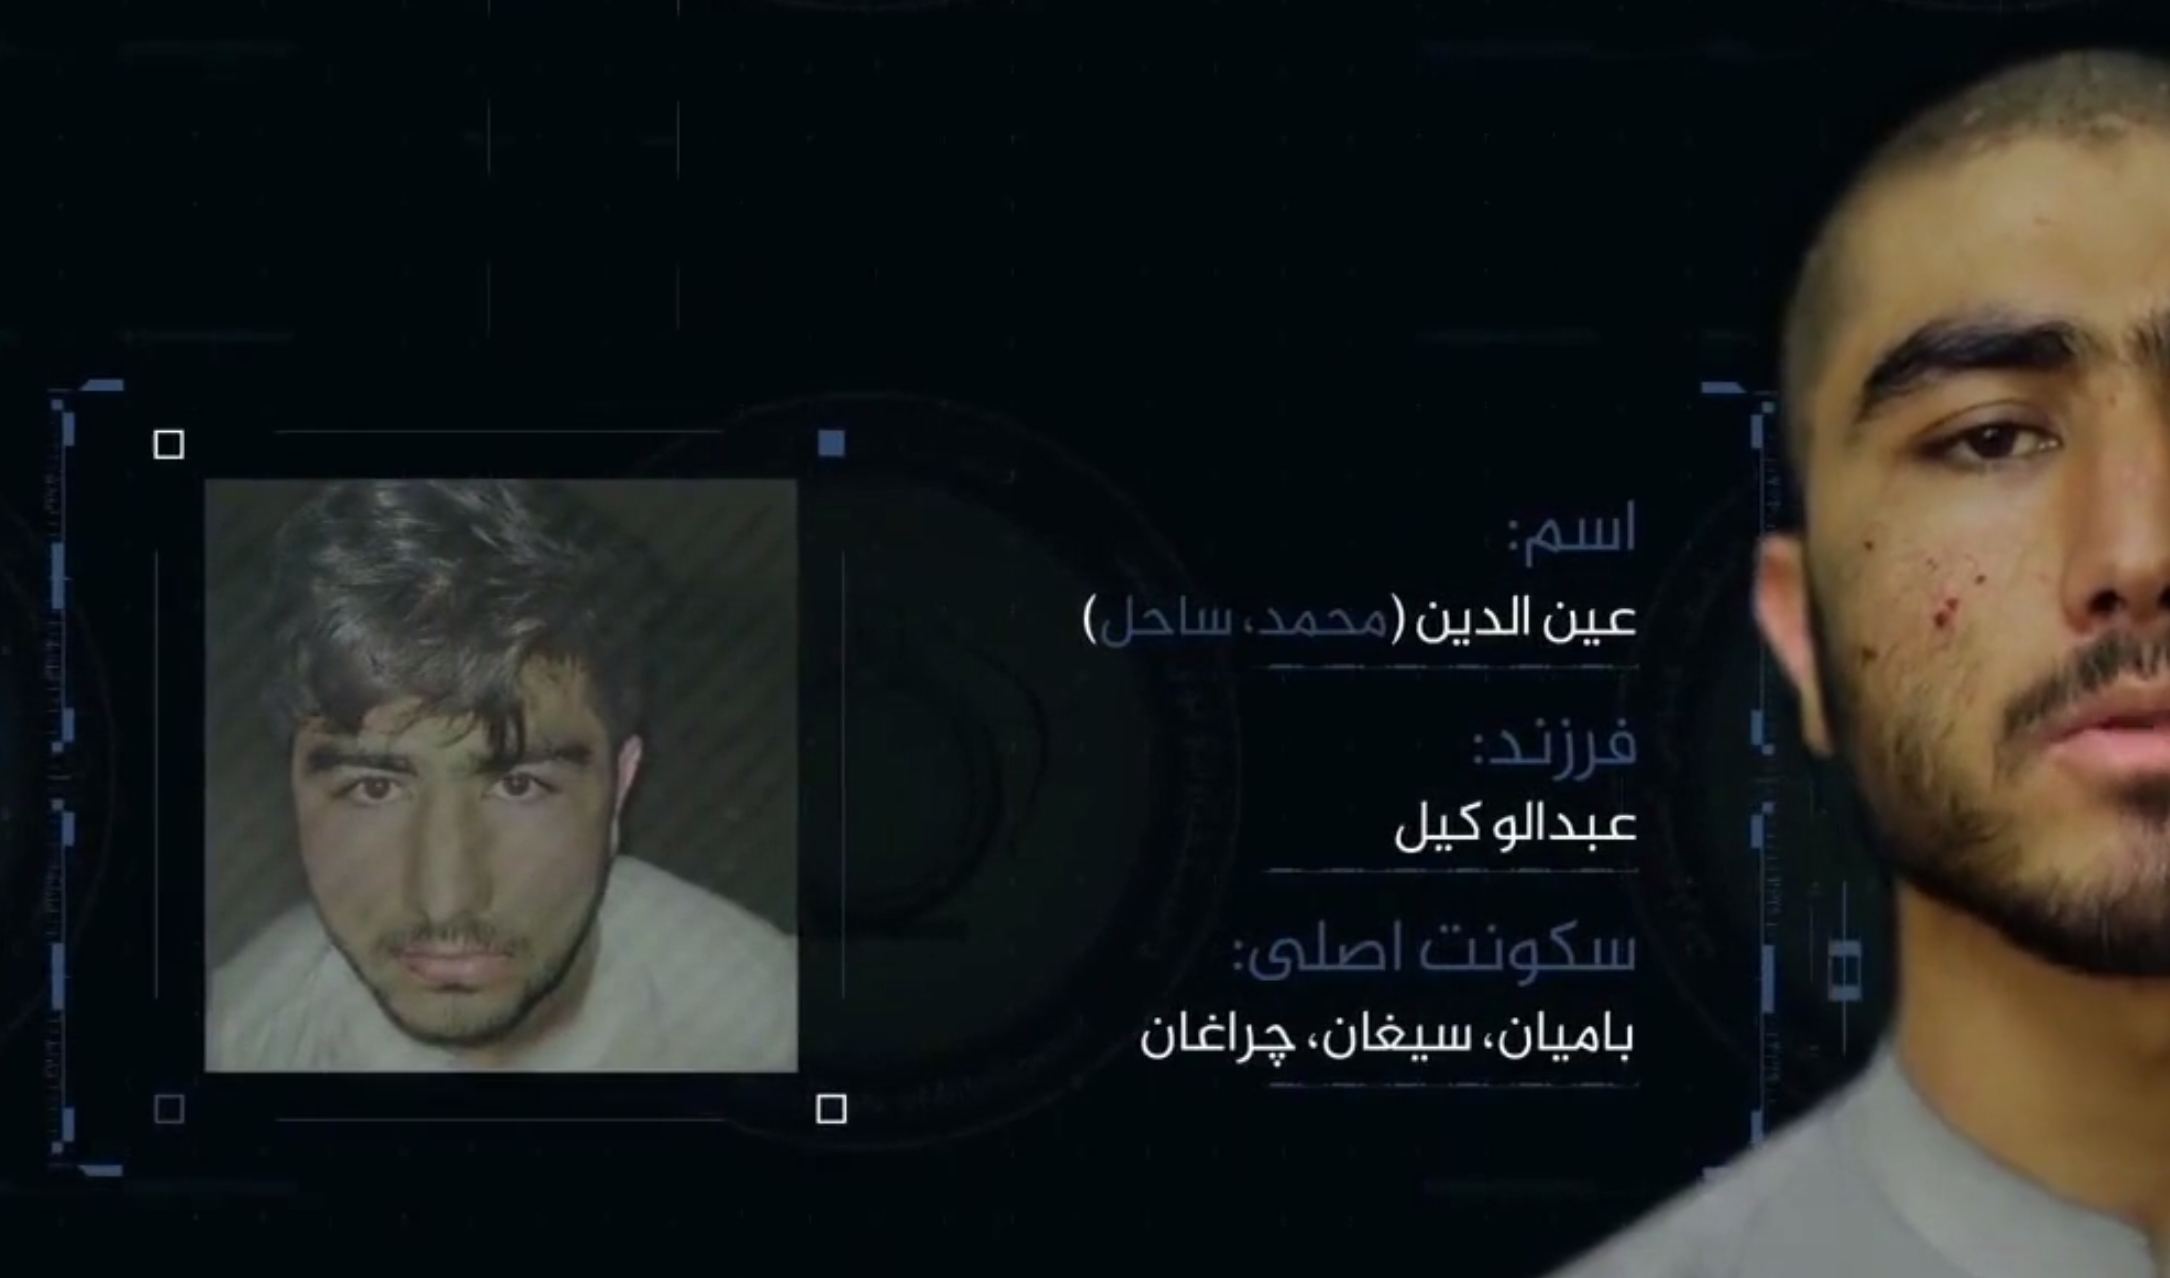 (Video) The Taliban (IEA) Published a Video Featuring an Alleged Islamic State Khurasan (ISK) Militants who Participated the Attacks in Balkh Province, Afghanistan - 2 April 2023